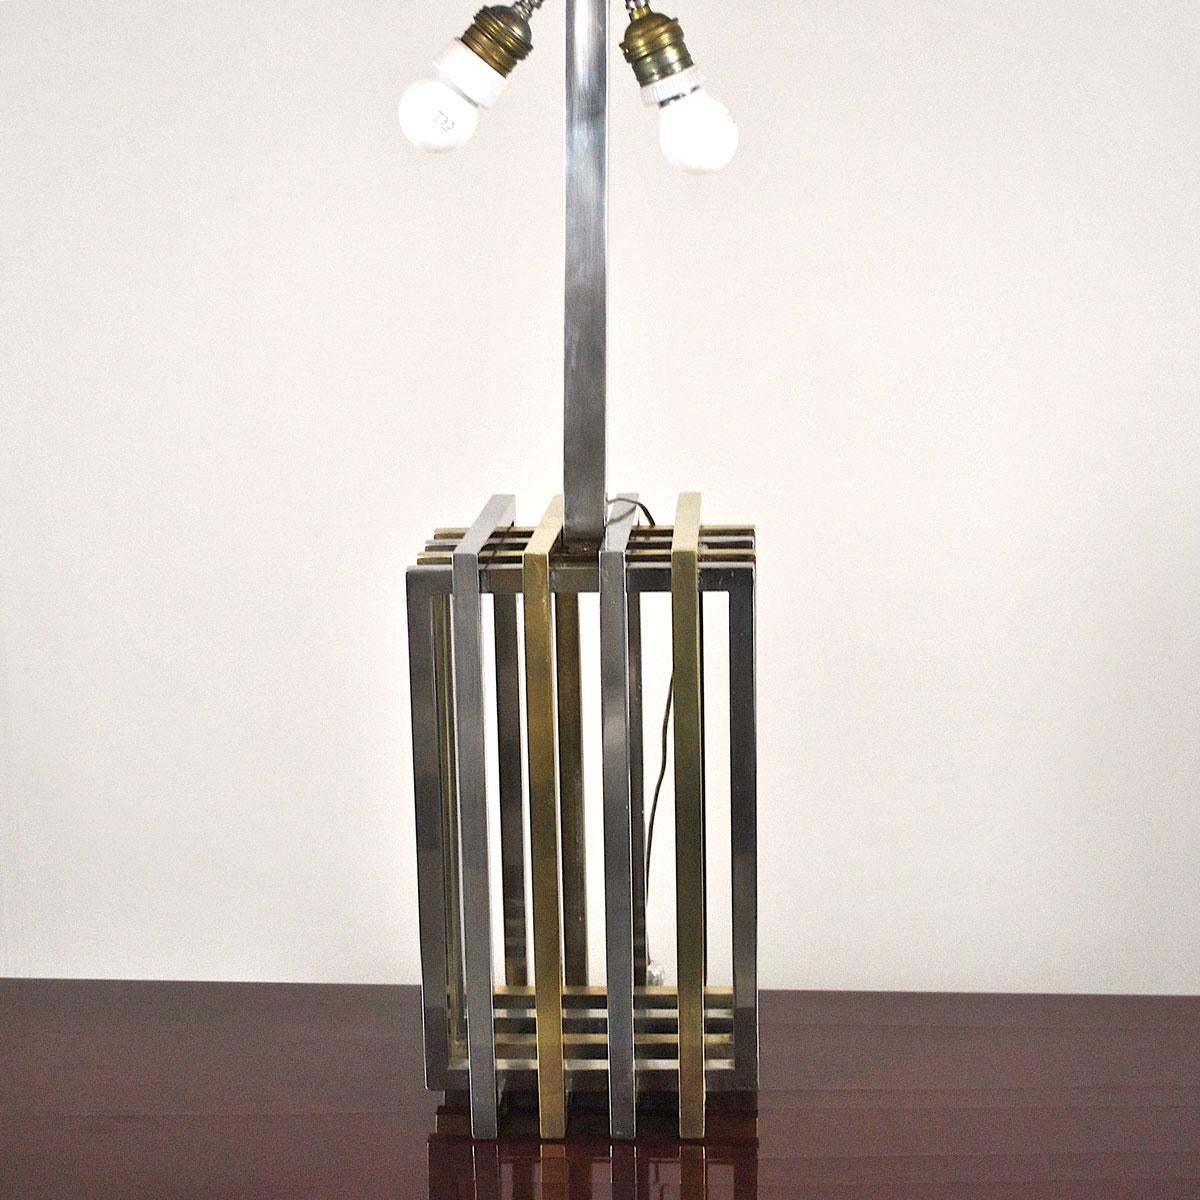 Romeo Rega Italian Midcentury Table Lamp in Brass from the 1970s For Sale 1